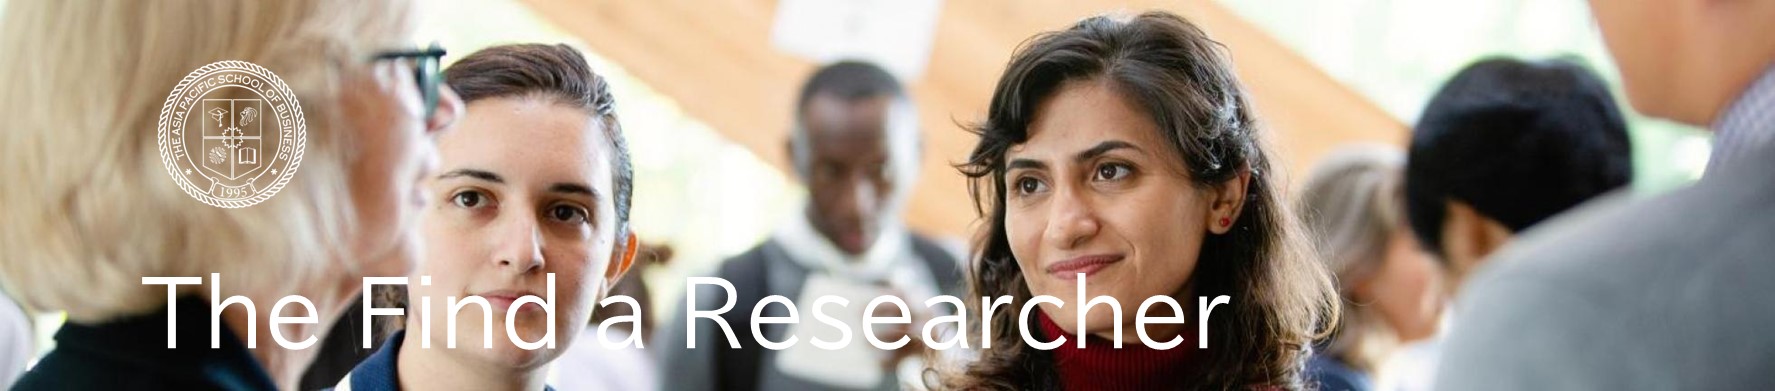 Search for a researcher